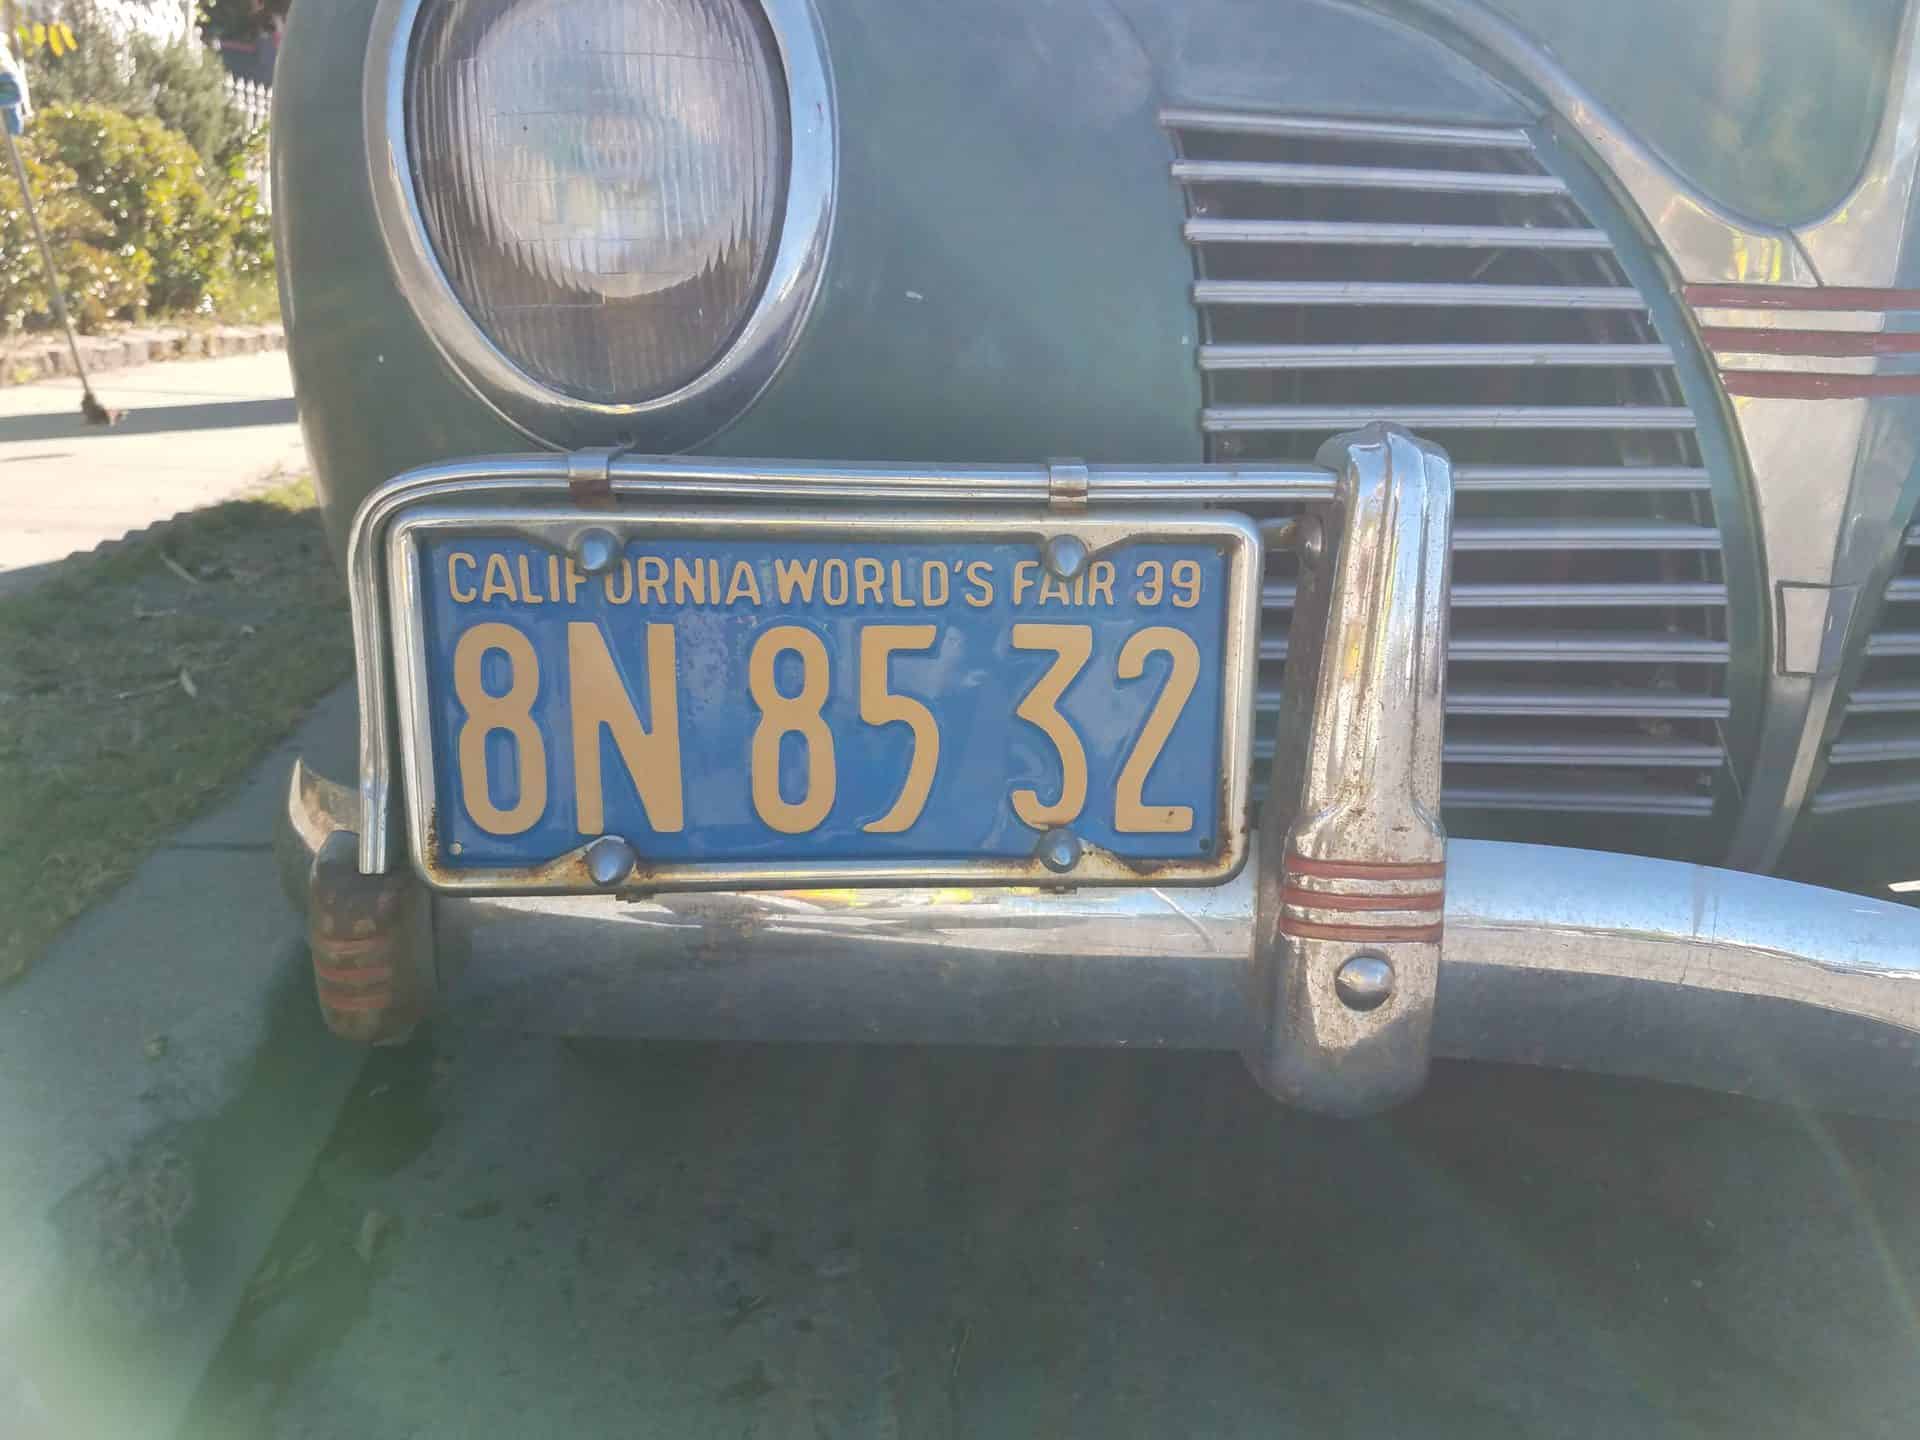 Classic How to put old plates on antique car with Original Part